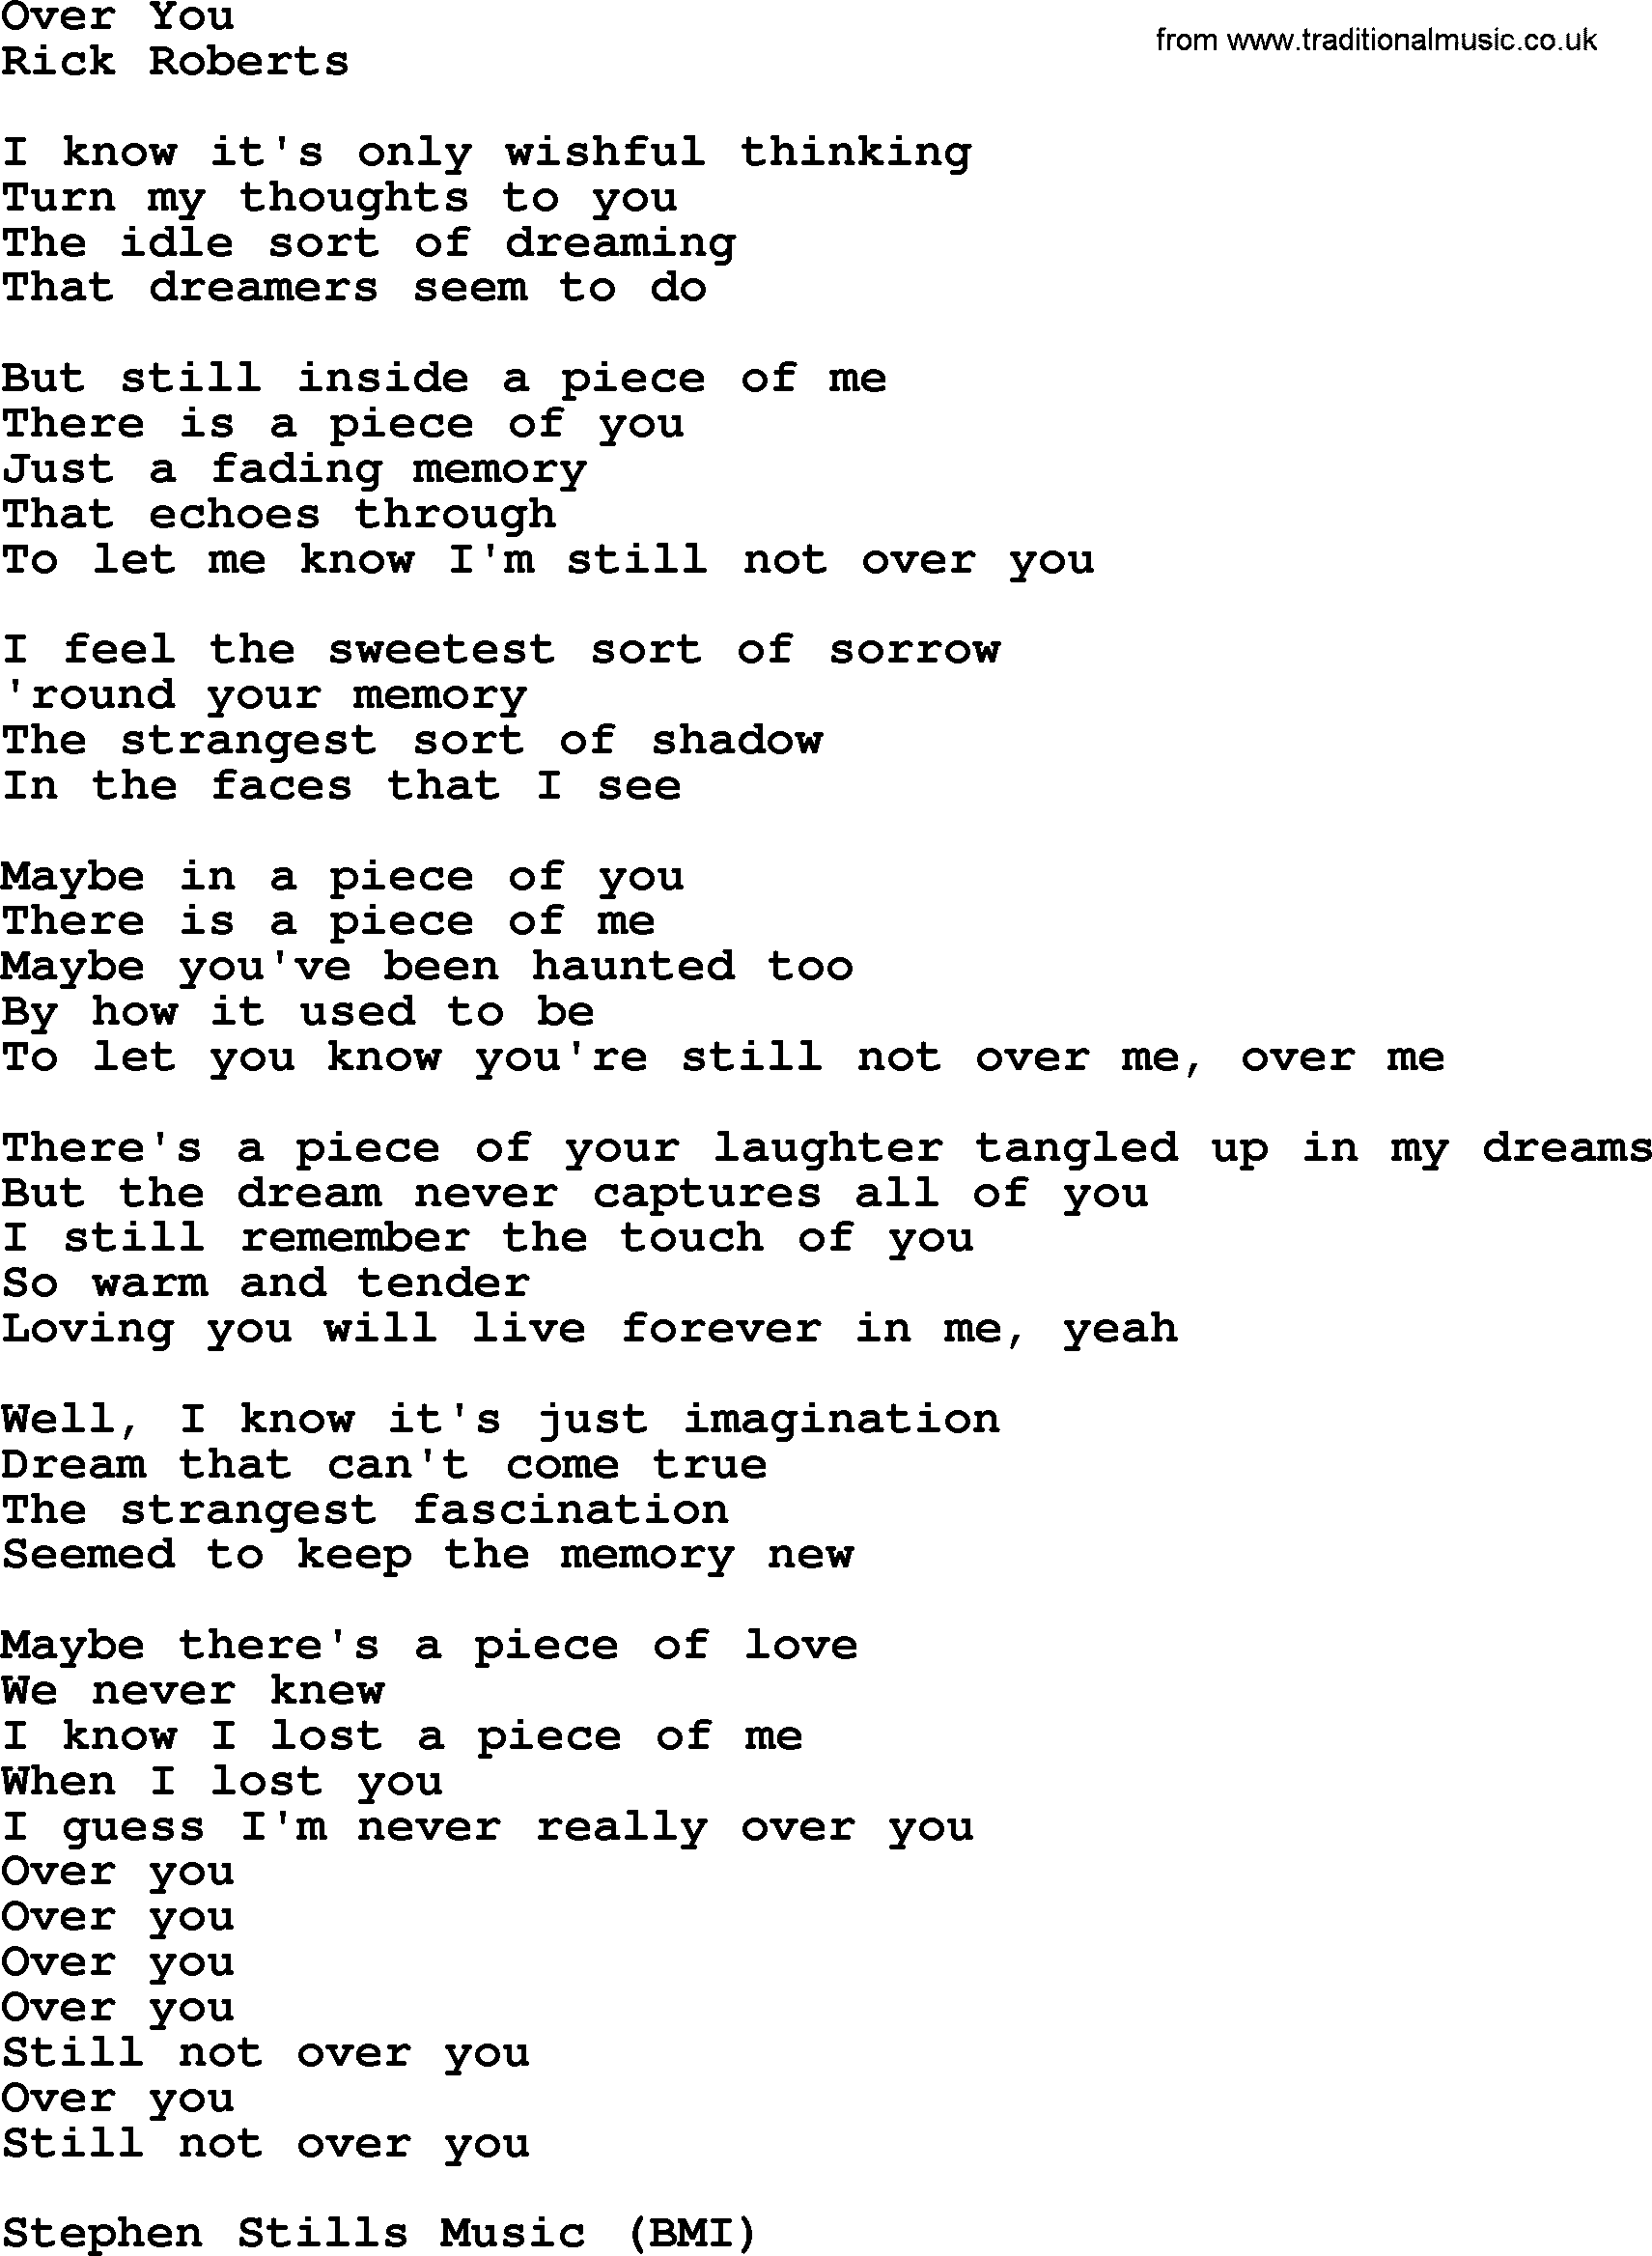 The Byrds song Over You, lyrics